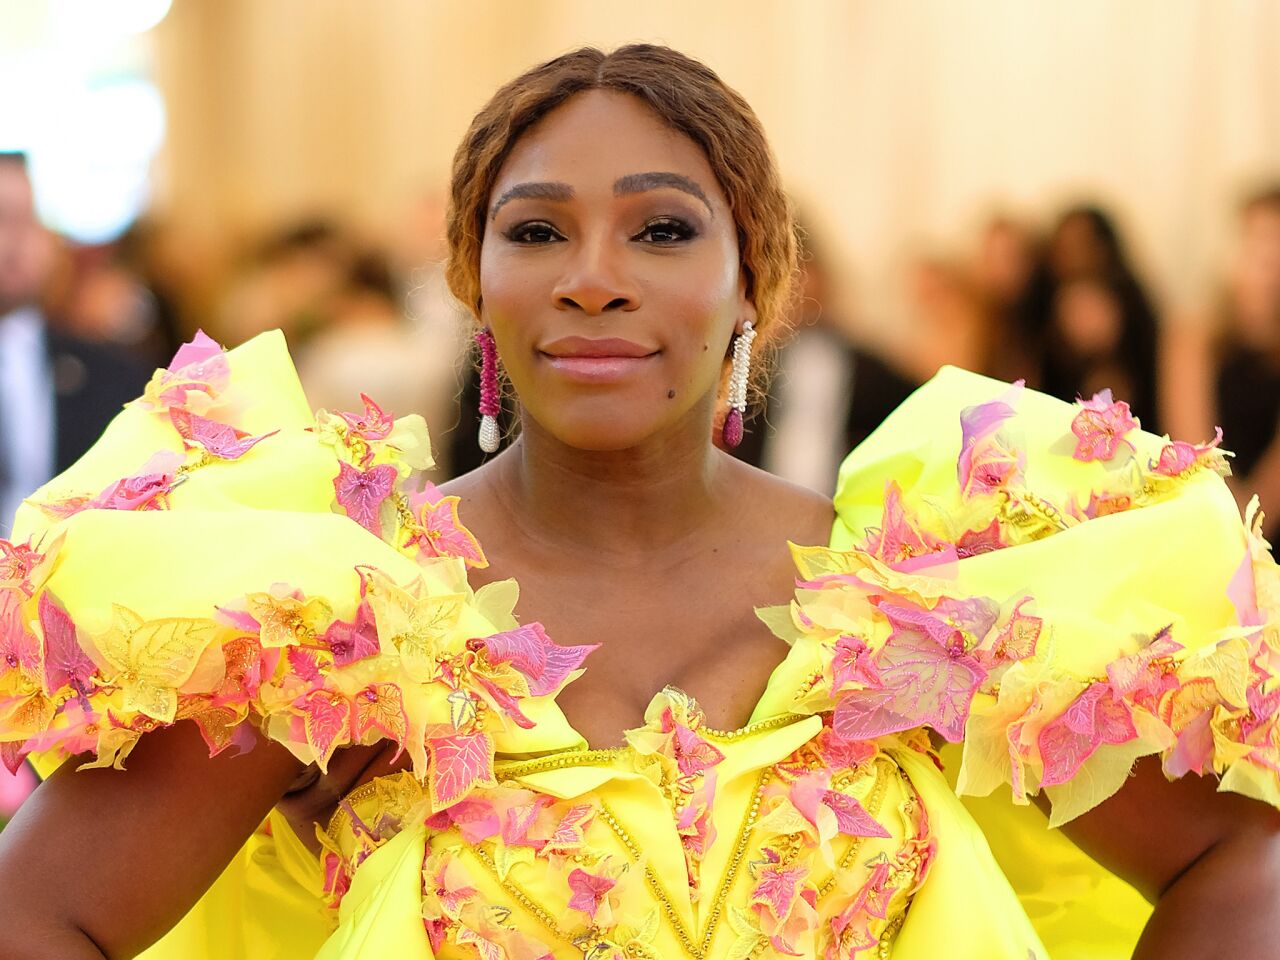 Tennis great Serena Williams went easy on the makeup, giving her yellow-and-pink Versace gown the spotlight.